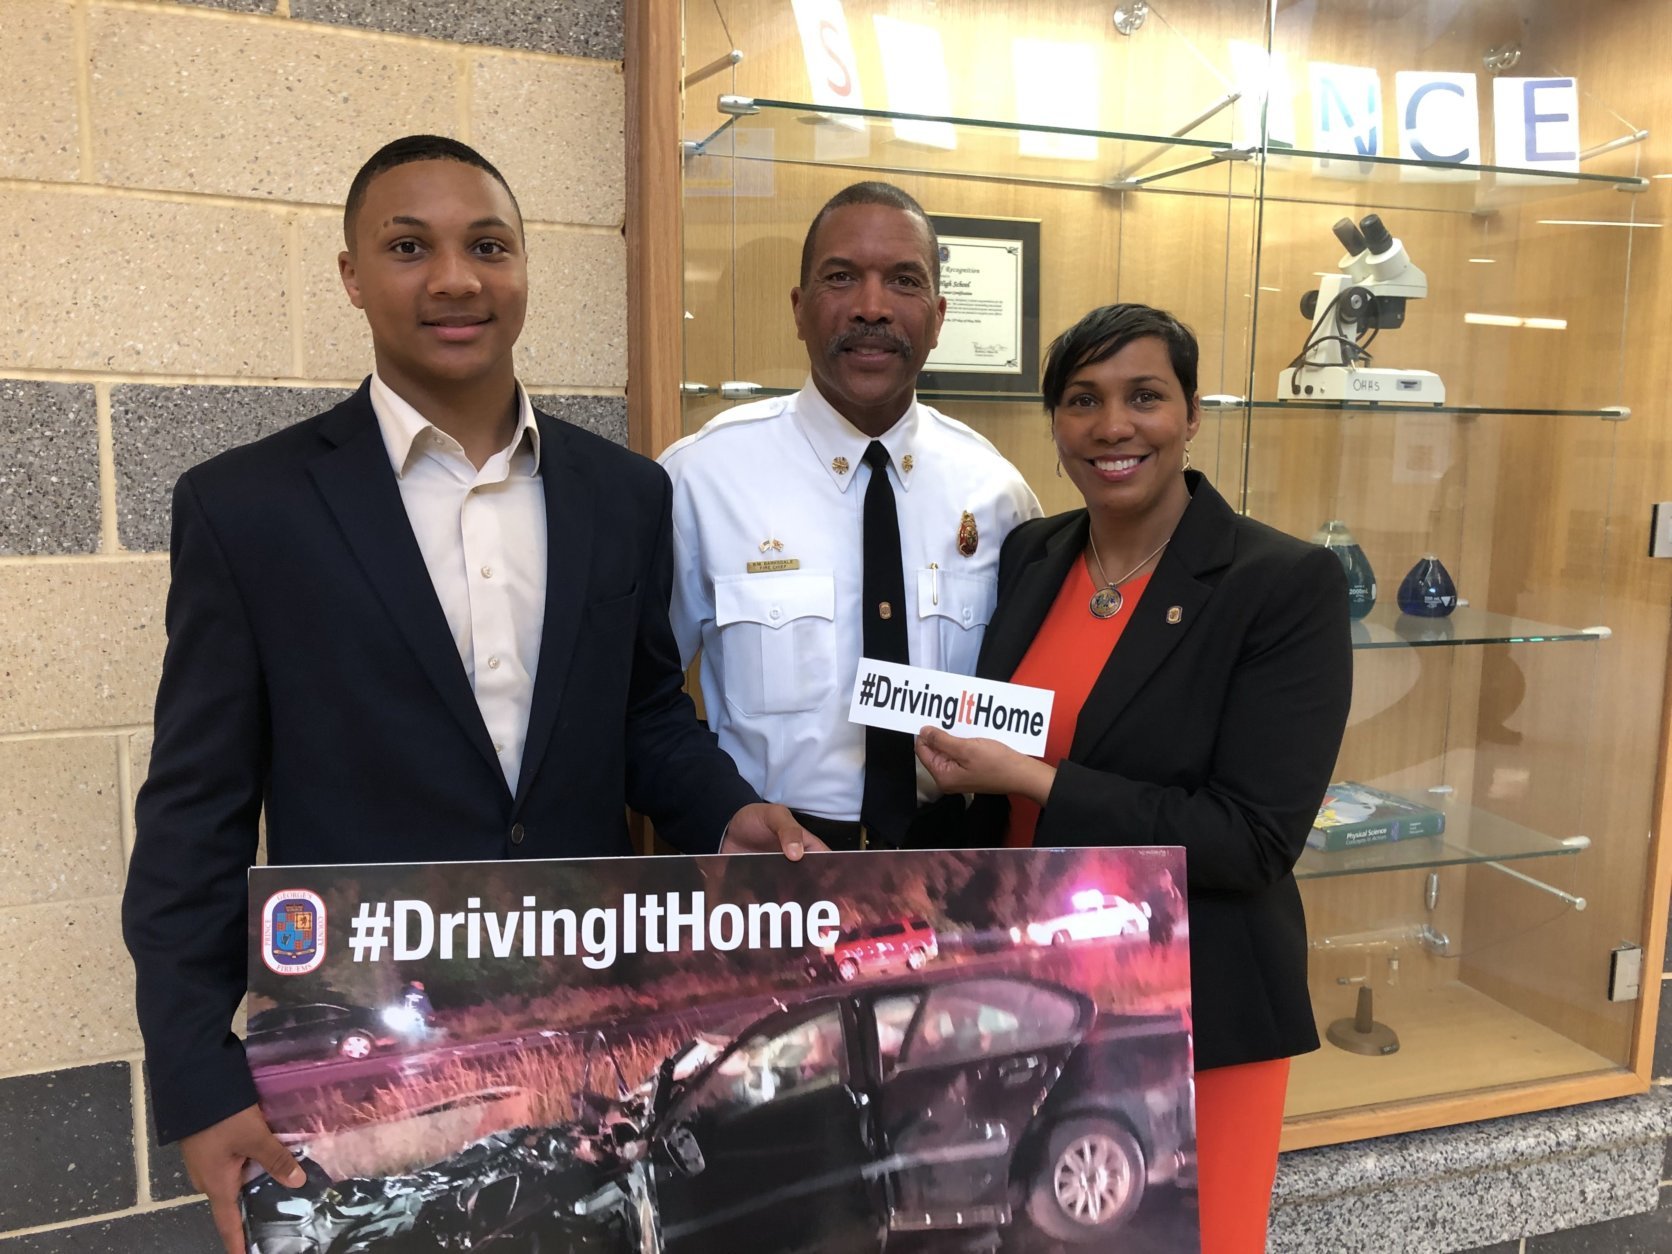 7th grader Jewel Walker, 13 attended the assembly where his mom and Prince George's Council Council member Monique Anderson-Walker (District-8) and Prince George’s County Fire Chief Benjamin Barksdale spoke about driving safely. (WTOP/Kristi King)